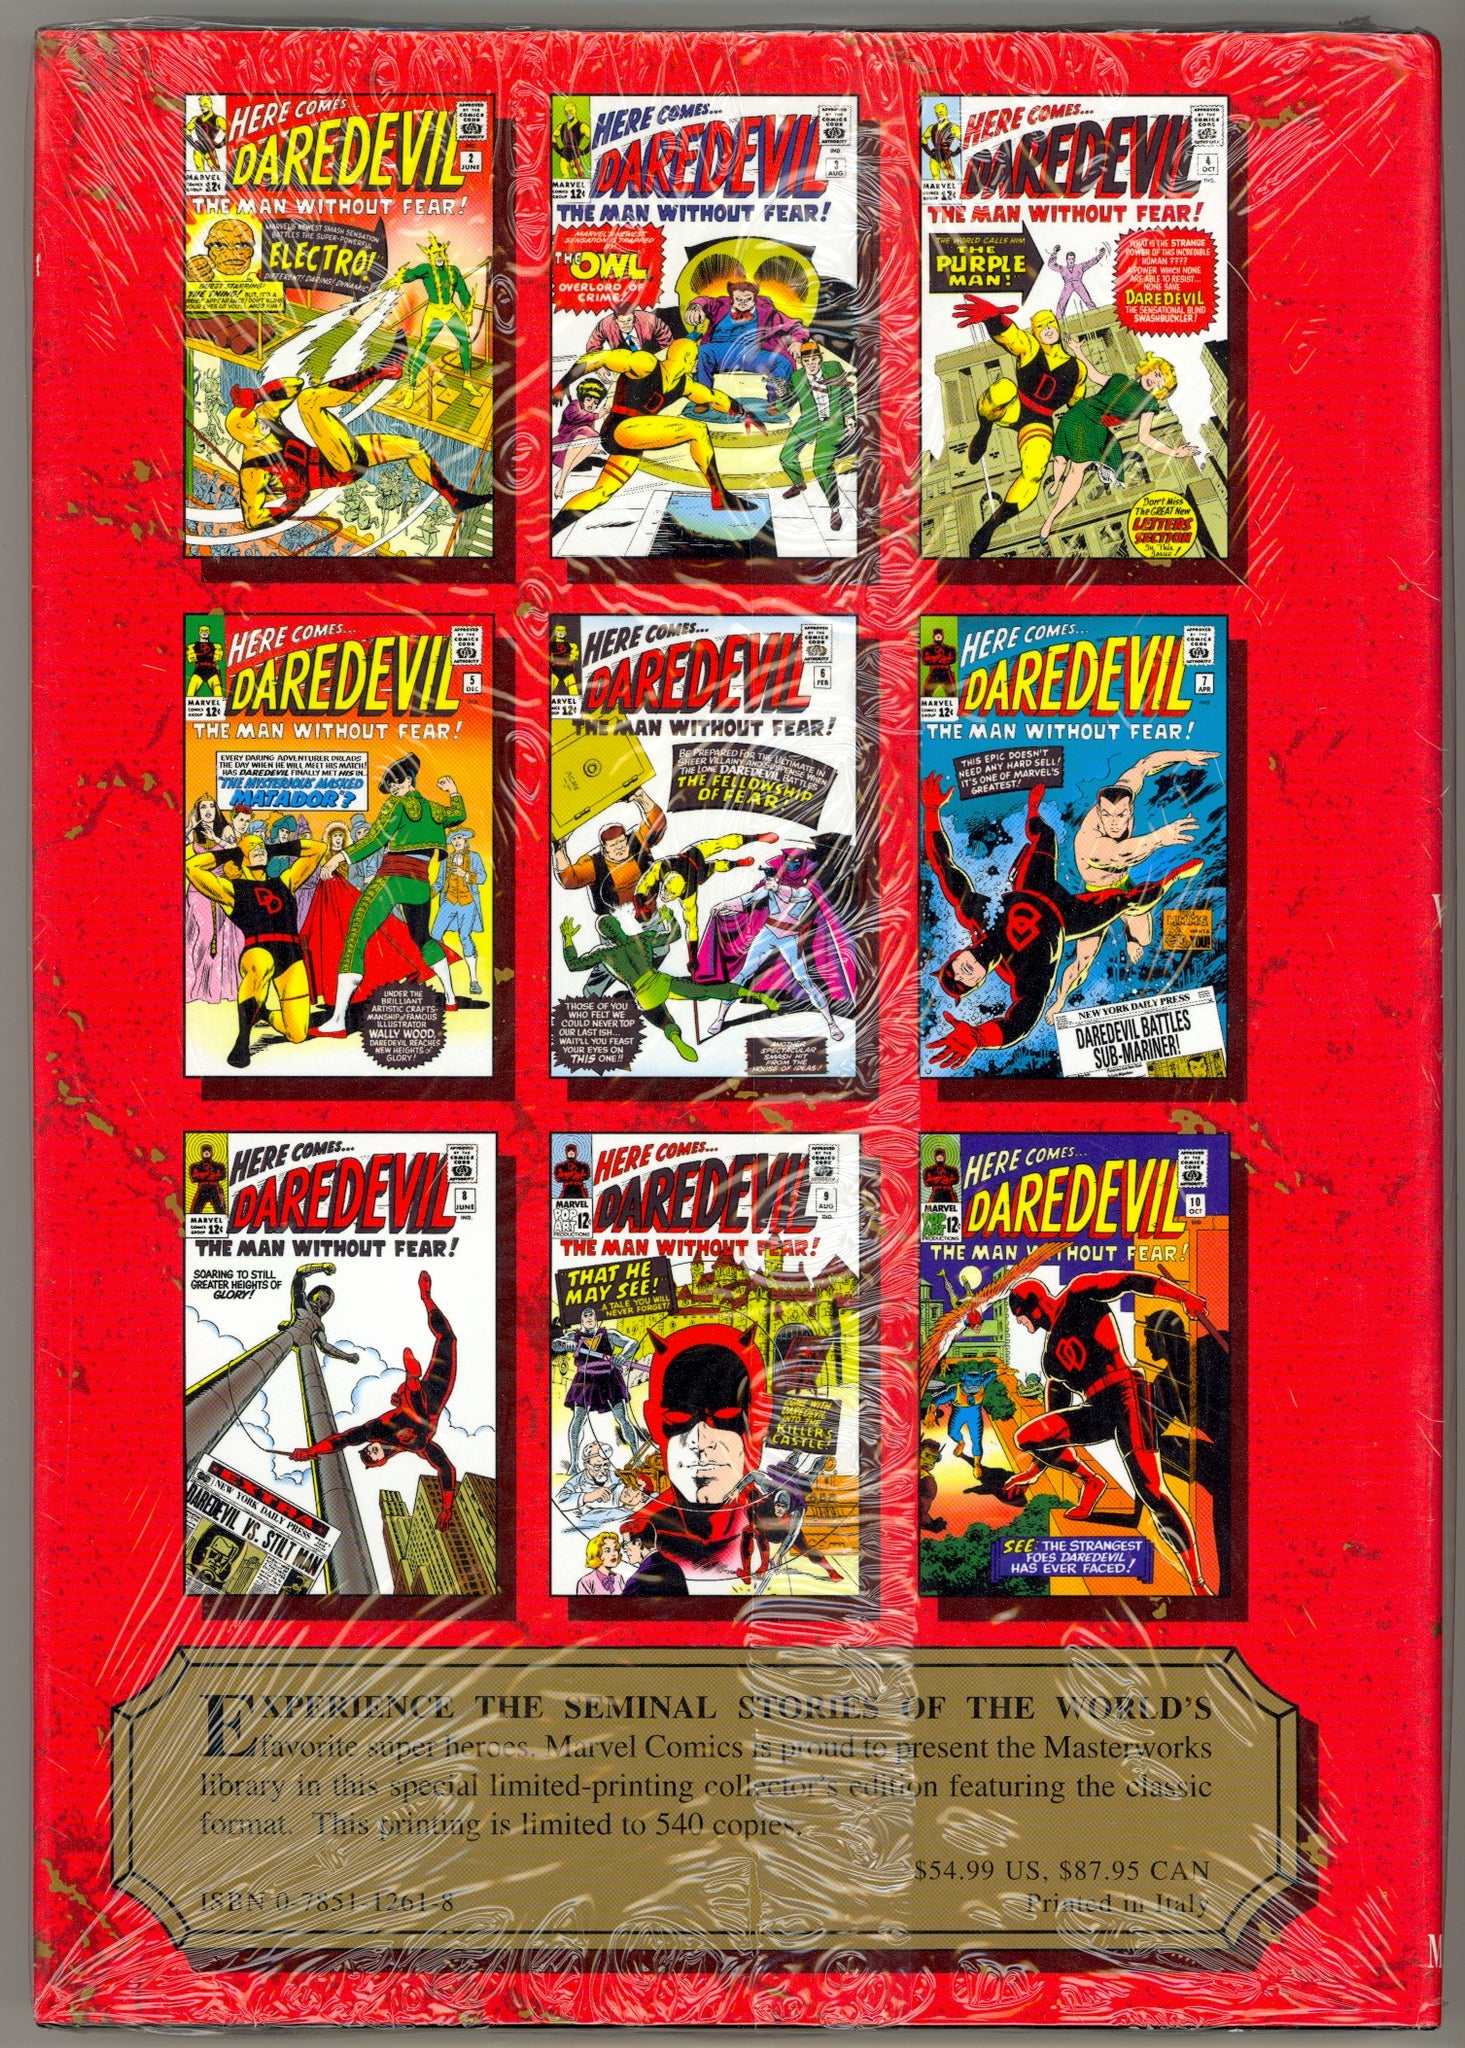 Marvel Masterworks volume 17 Daredevil issues 1-11, Limited Collectors Edition